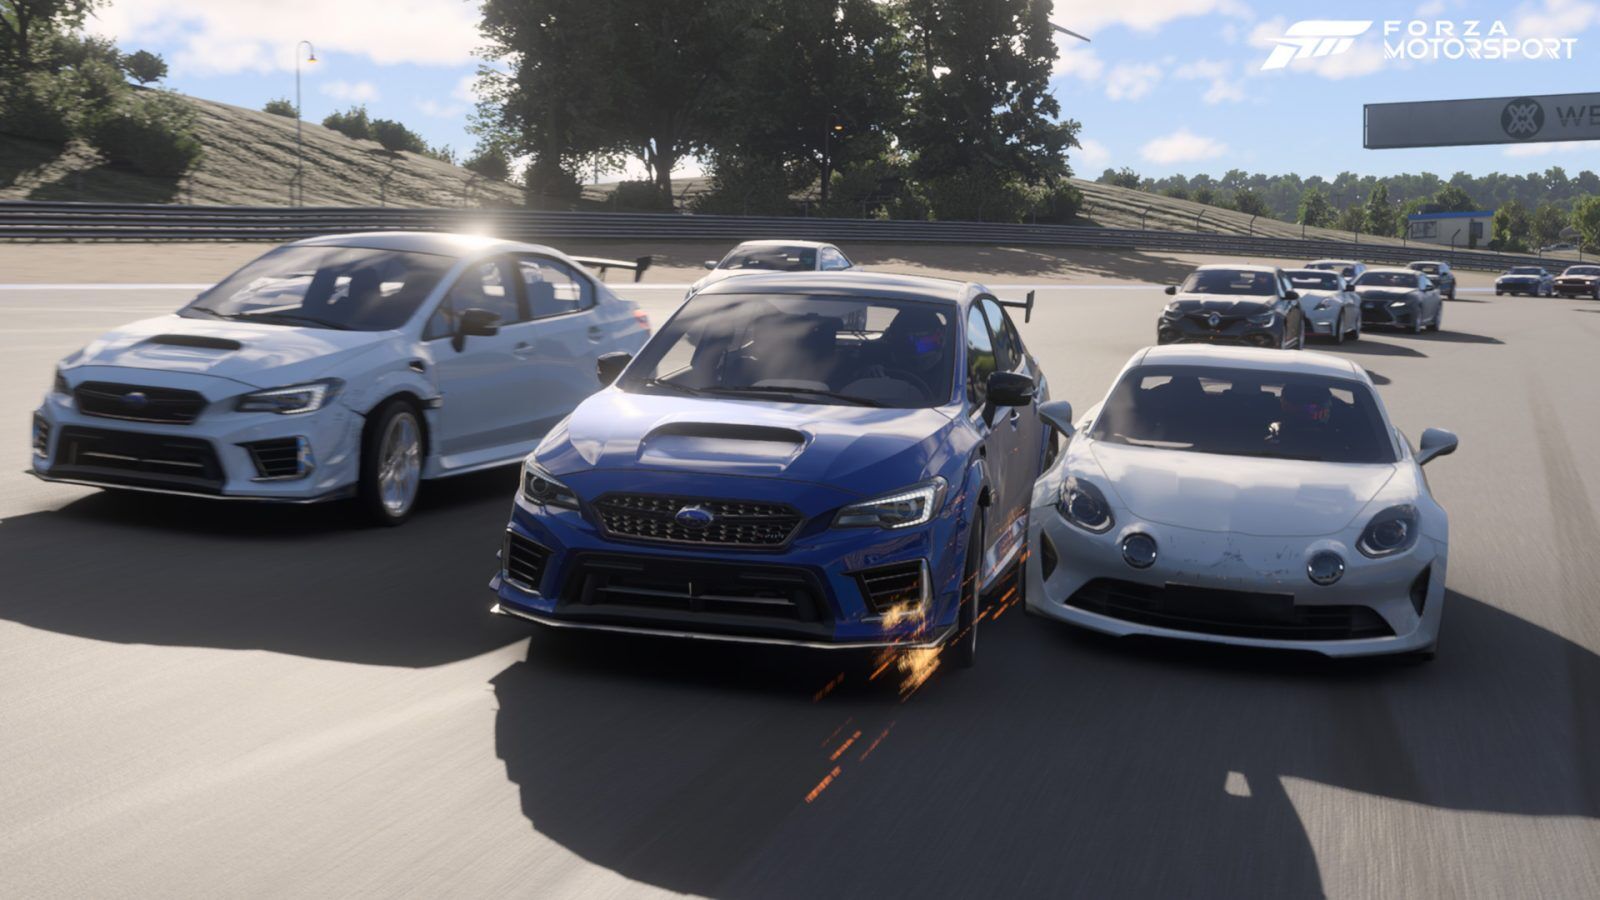 Forza Motorsport Set To Ditch Car Upgrade Restrictions OT